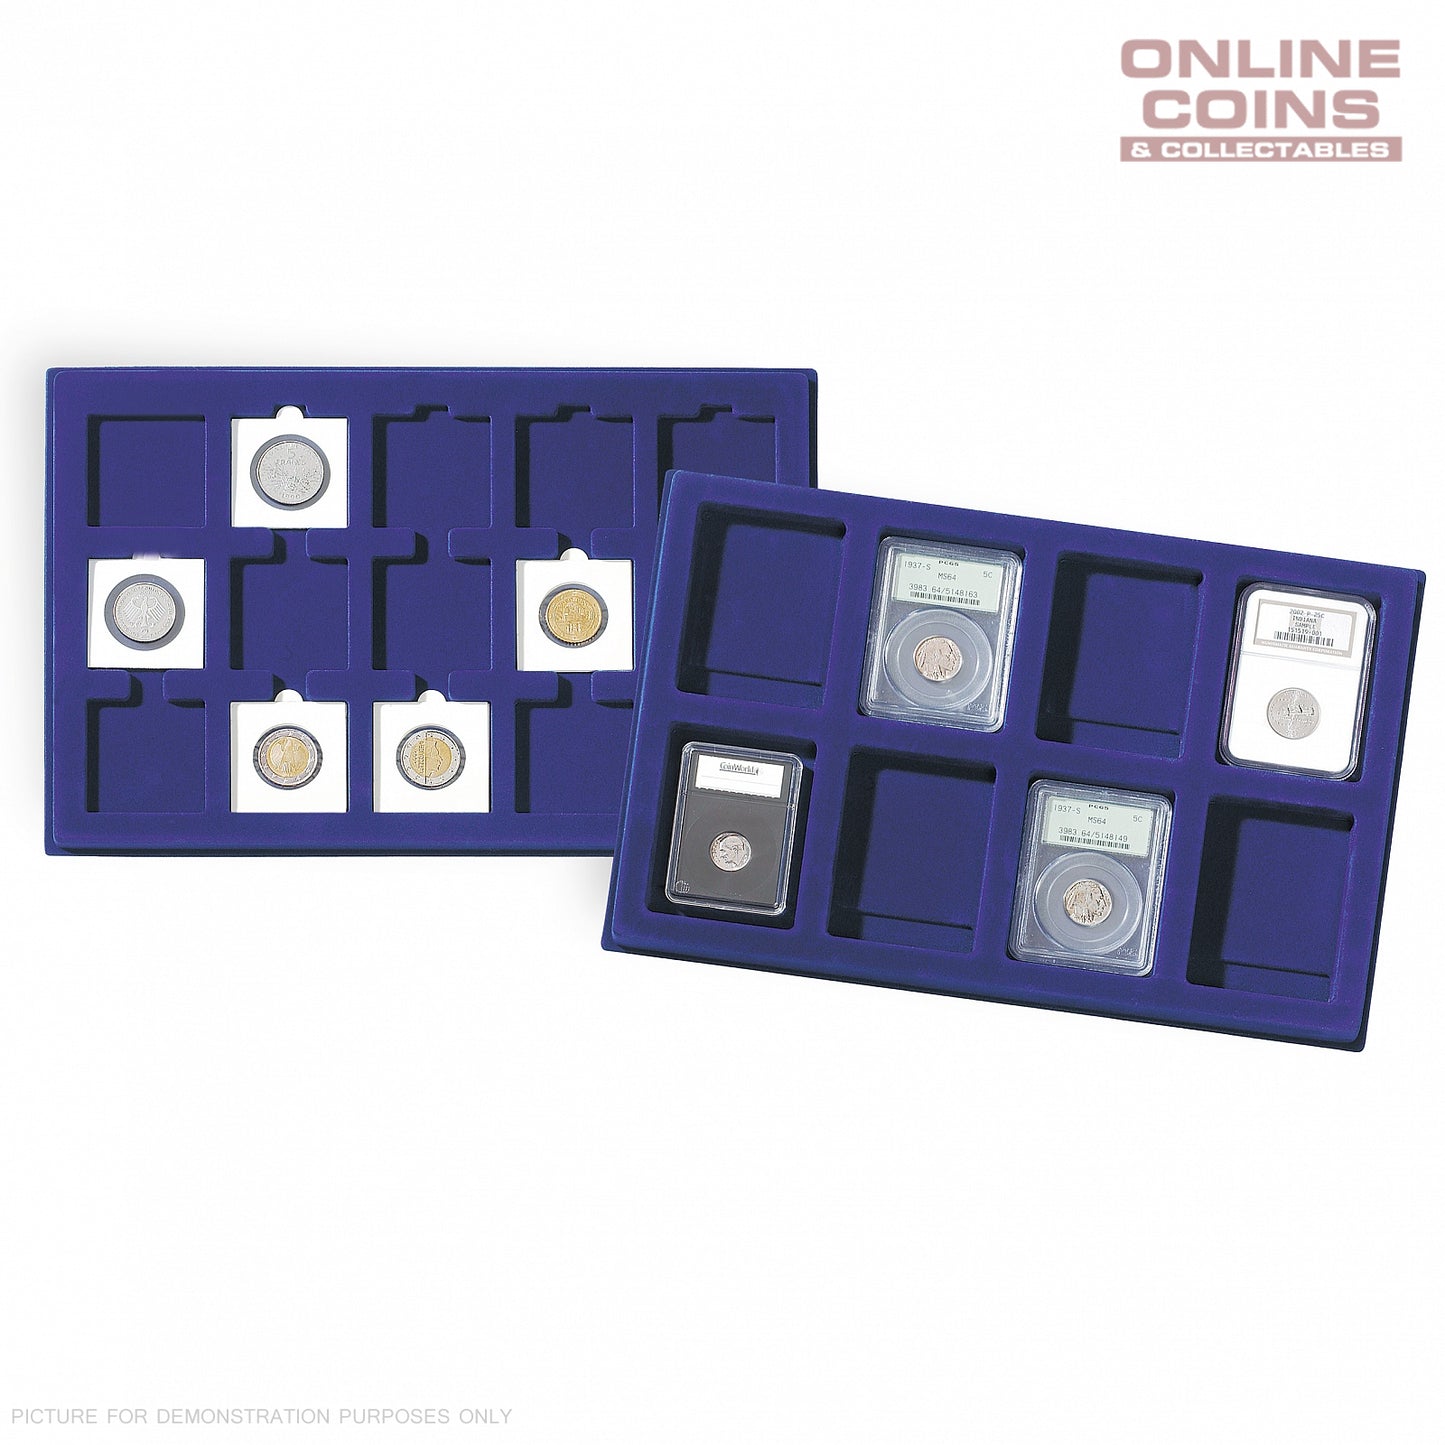 Lighthouse Coin Presentation Trays x 2 TAB40 Blue - Holds 40 Coins up to 33mm (Larger Trays)